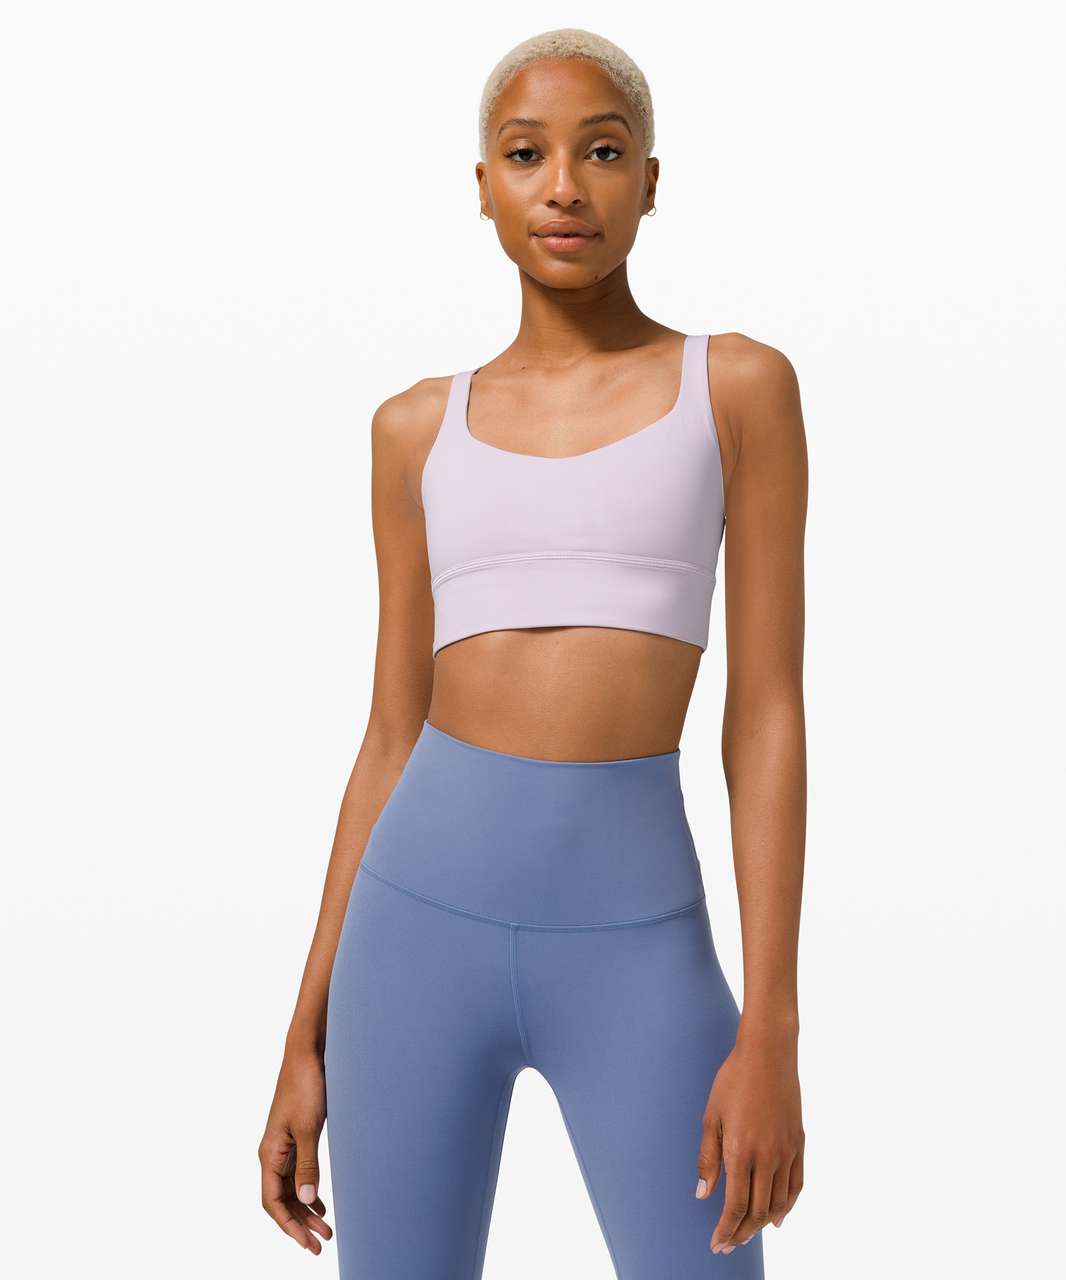 Lululemon Free to Be Long-Line Bra - Wild *Light Support, A/B Cups - Lavender Dew